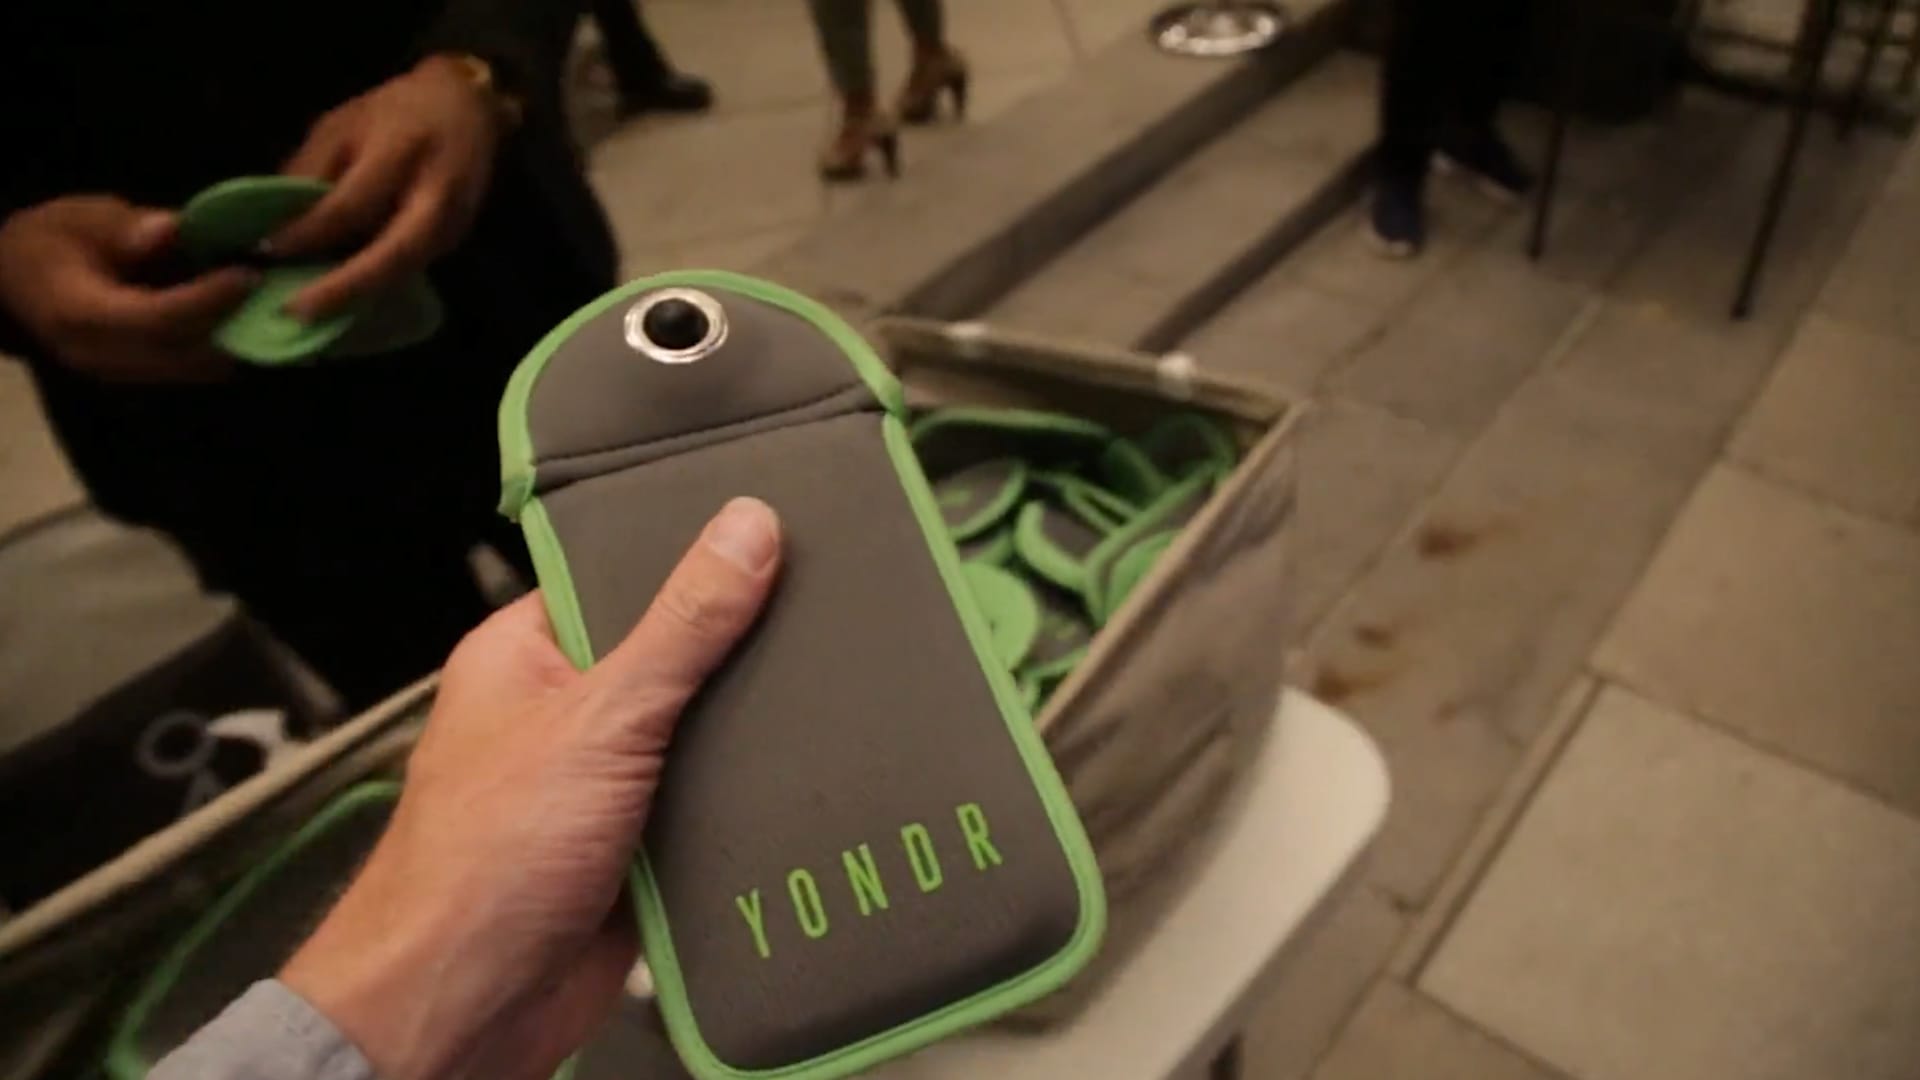 Yondr: The £18,000 solution that could keep phones out of the classroom